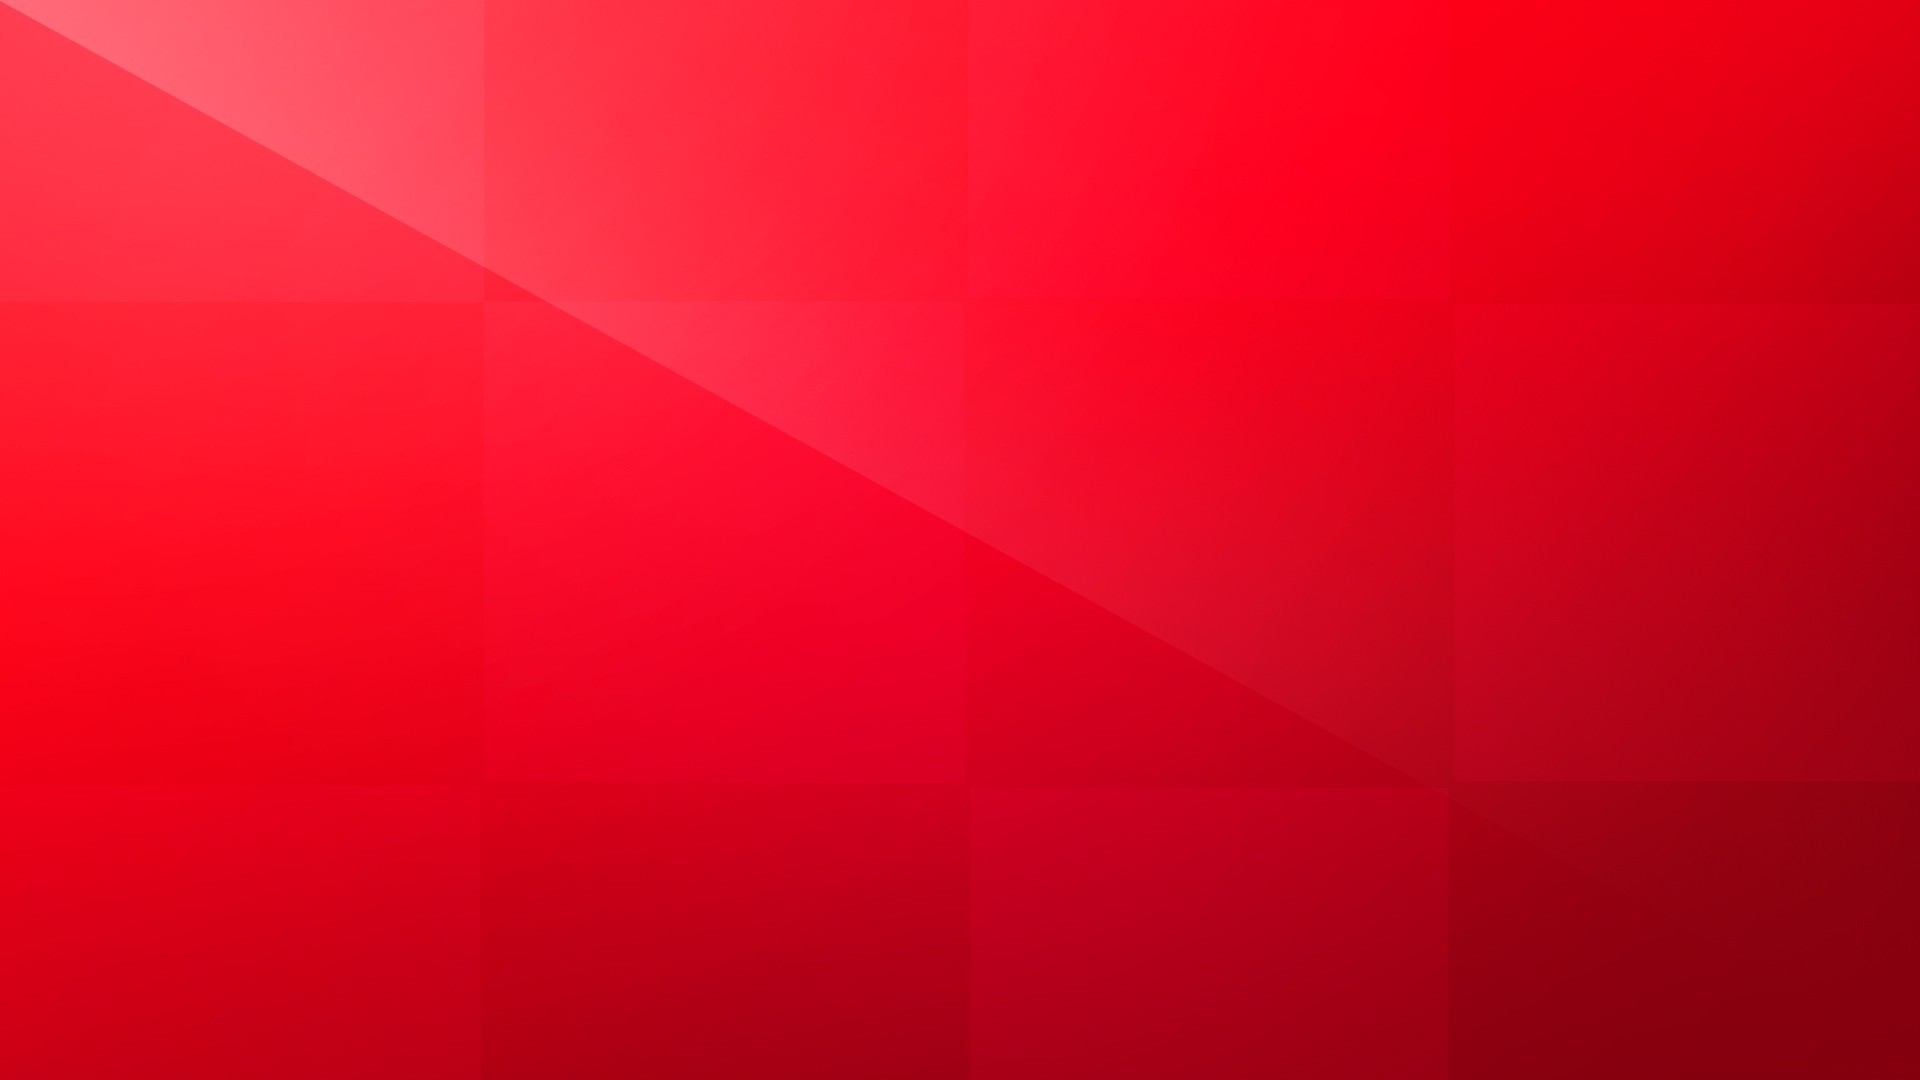 1920x1080 ... backgrounds for red plain color backgrounds www 8backgrounds com ...